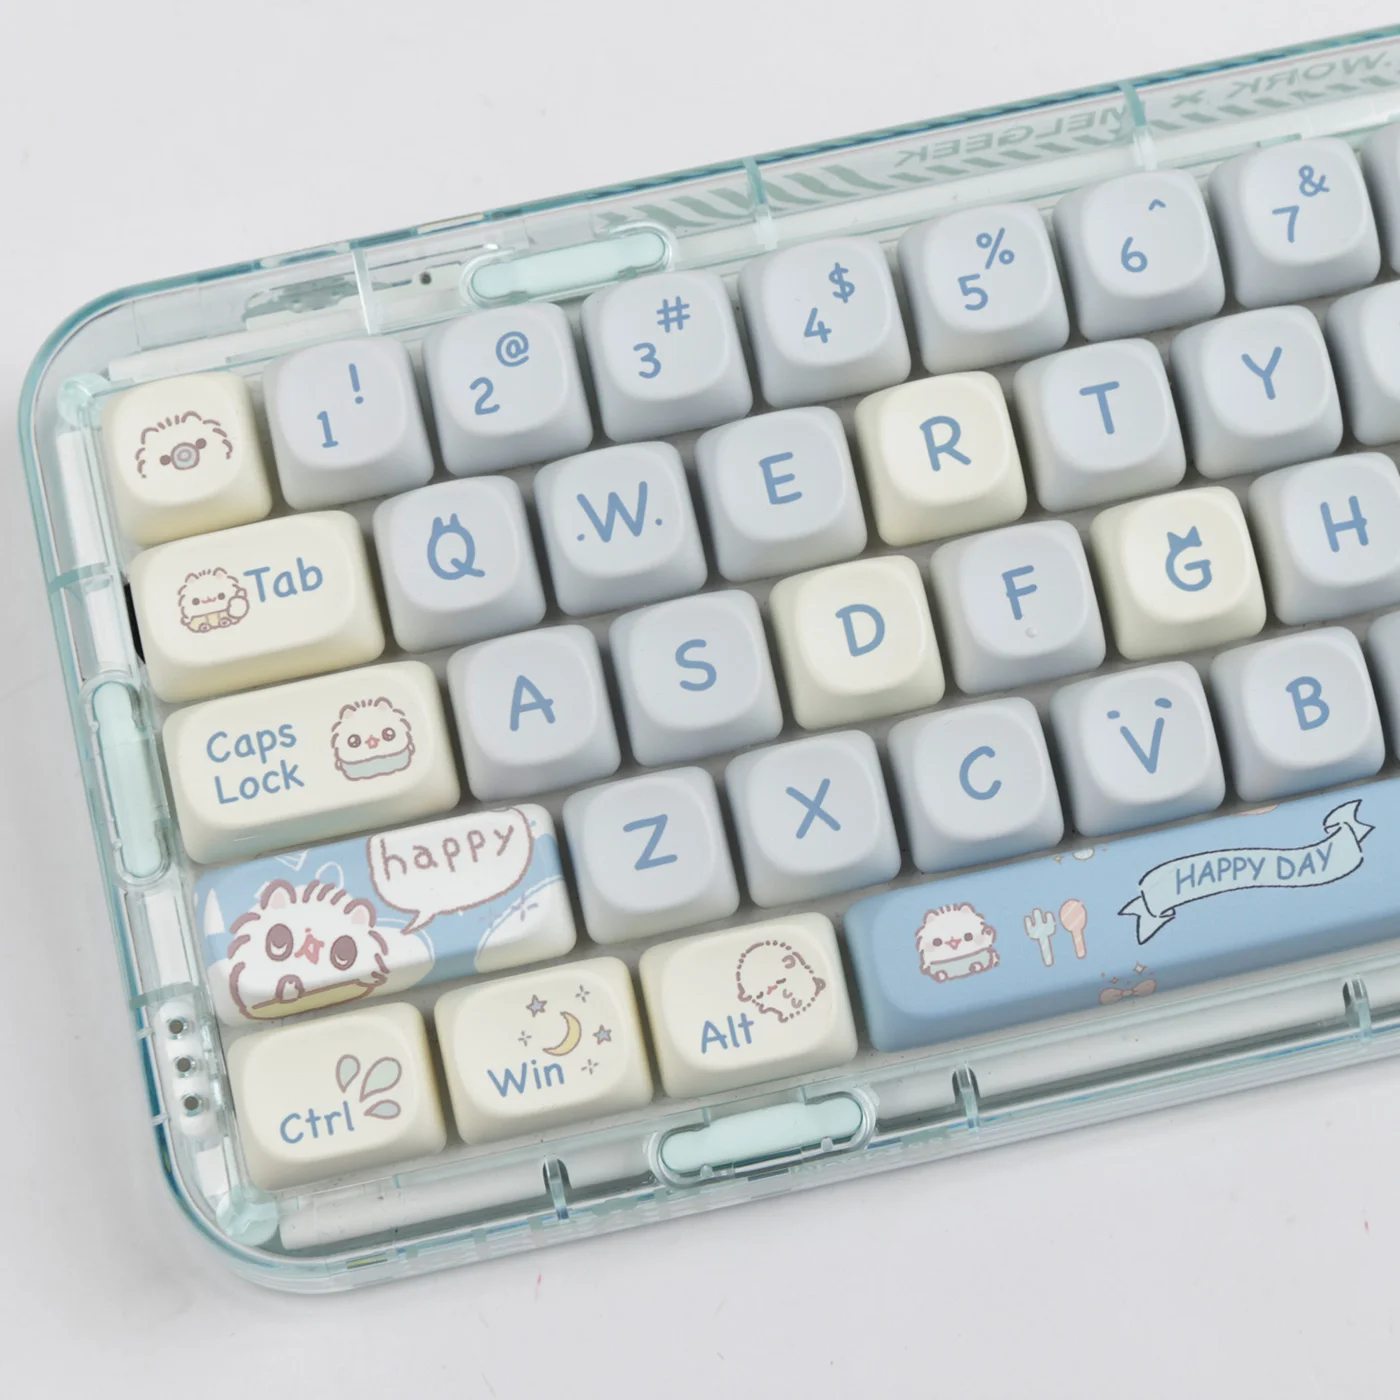 

144 Keys MOA Keycaps Blue Meow Meow theme ball cap PBT Cartoon Keycap sublimation For MX Switch Fit 61/87/104/108 Keyboard 키 캡